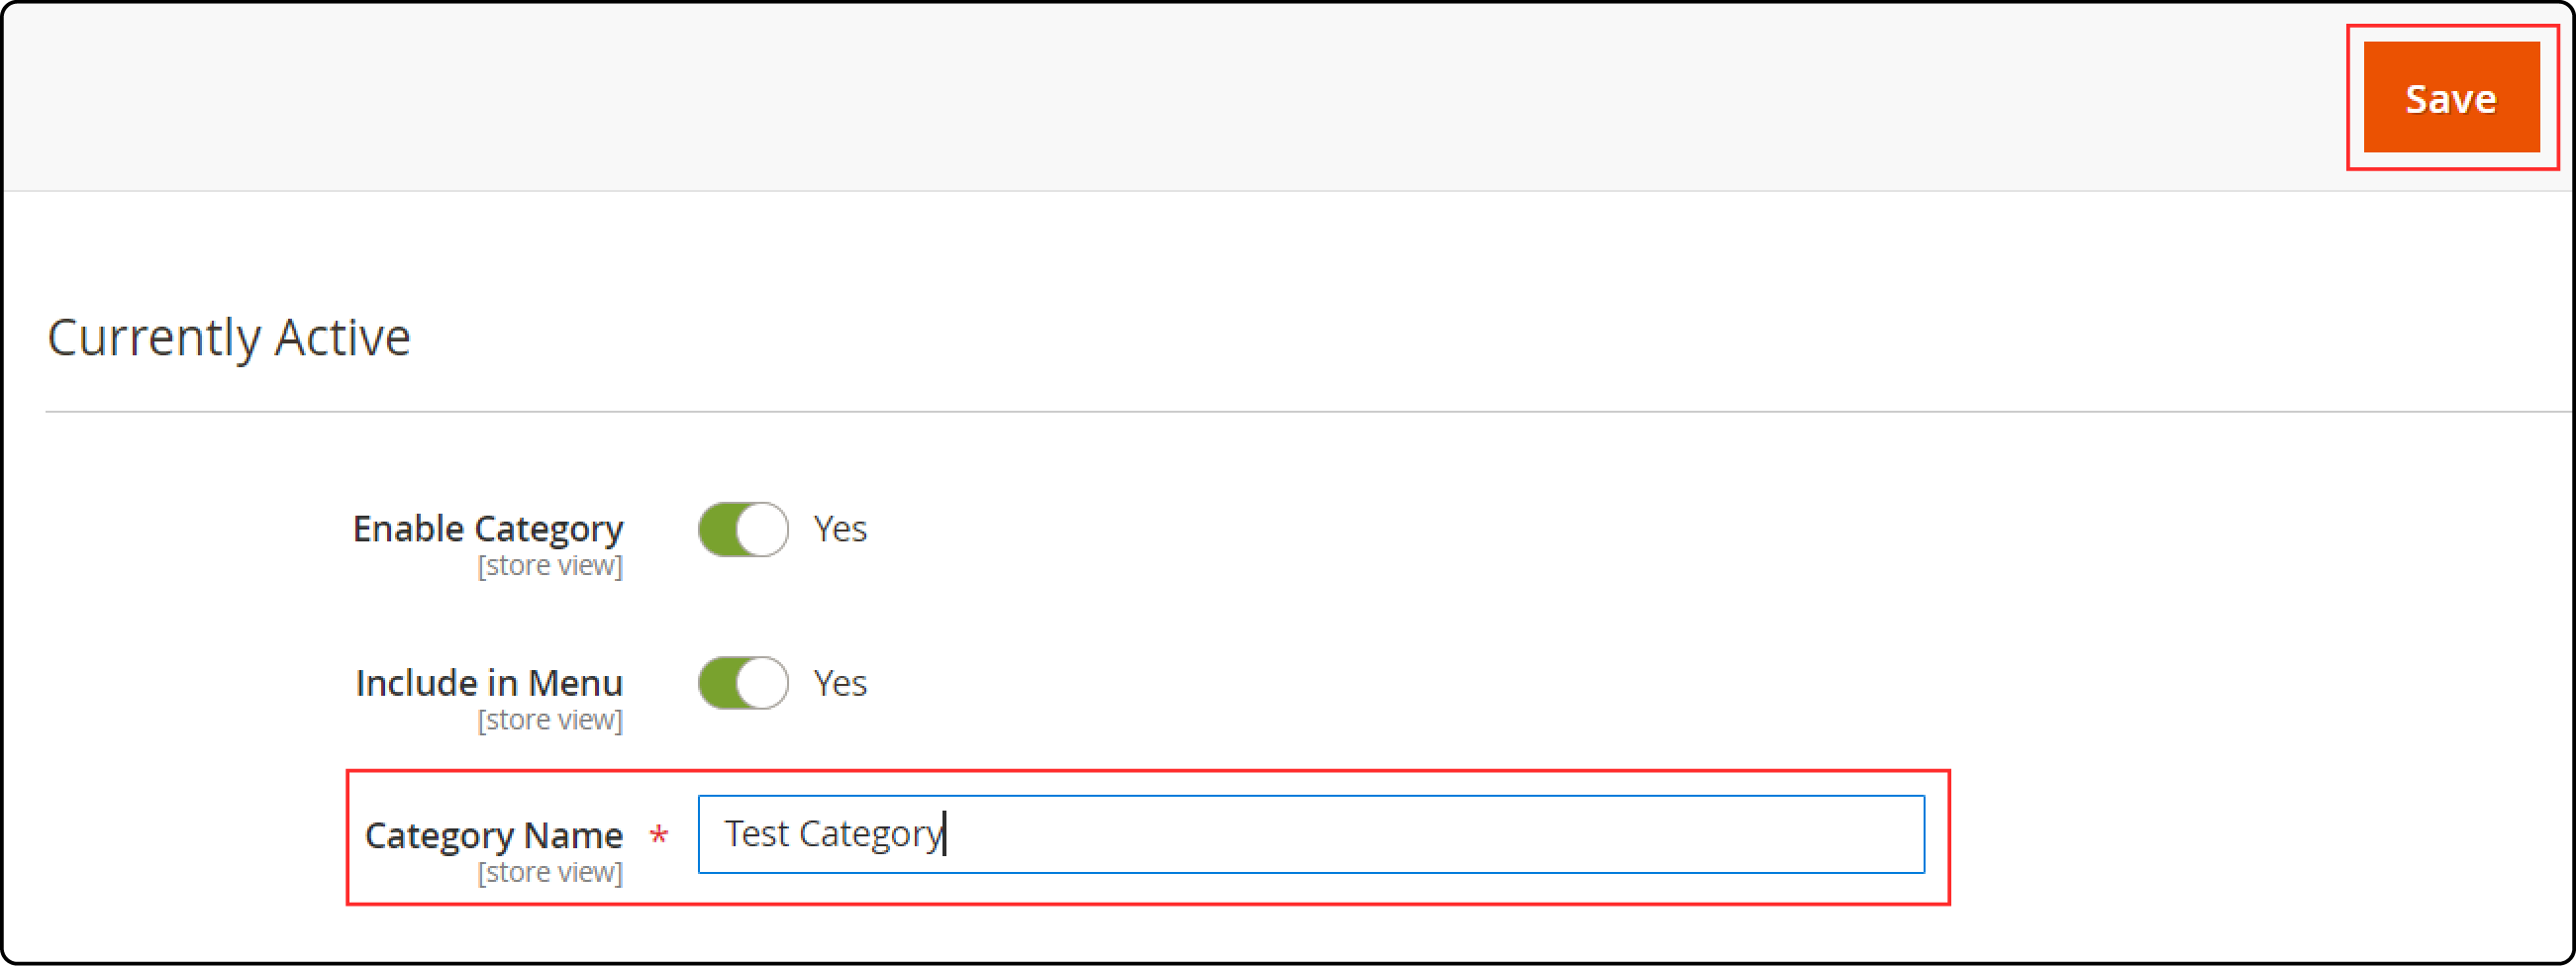 Verify for a category-enter Test Category and Save